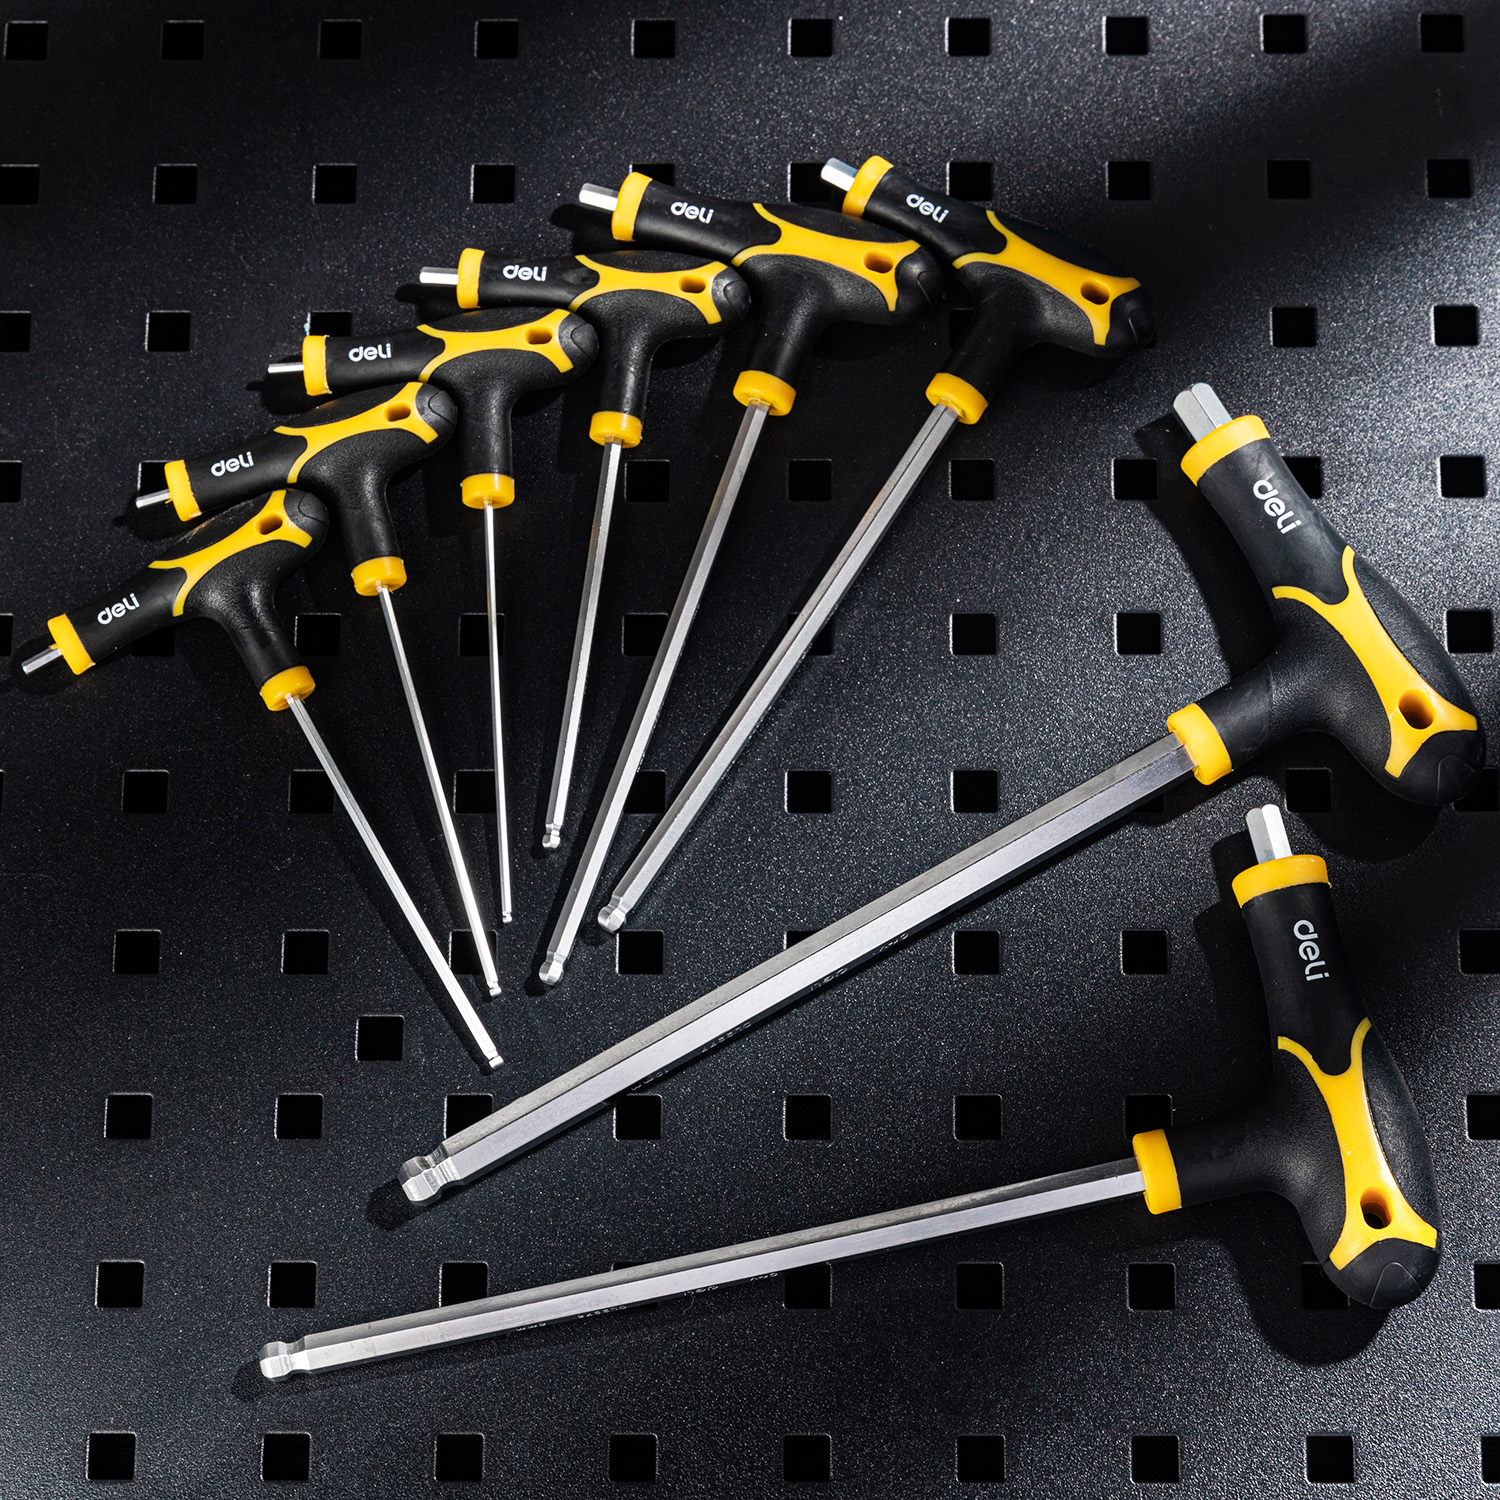 Precision Hex Keys with ball end for screwdriver